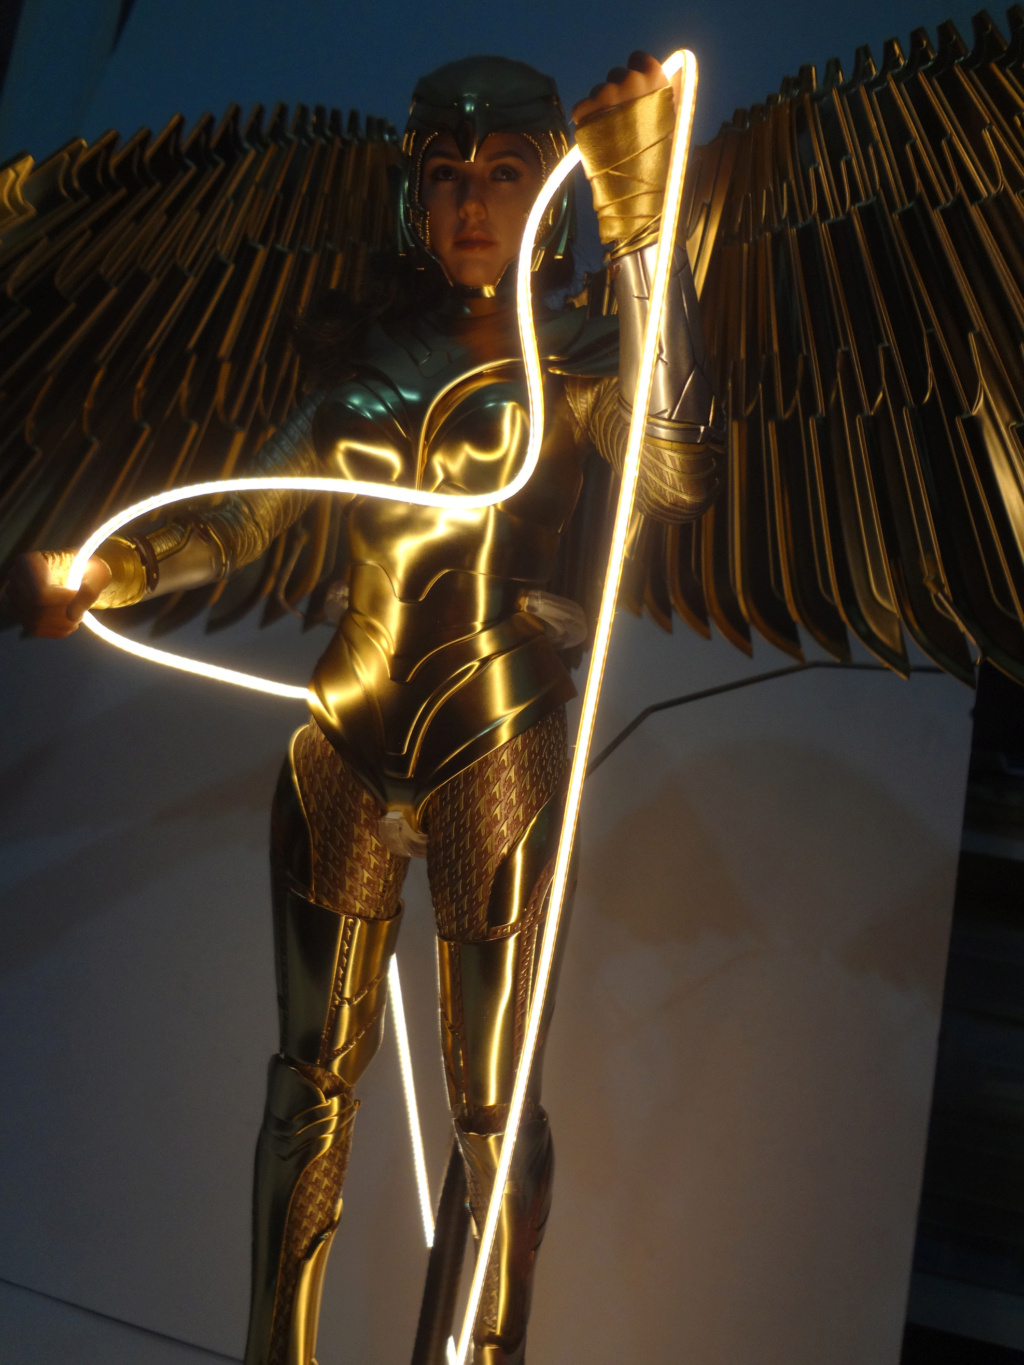 NEW PRODUCT: HOT TOYS: WONDER WOMAN 1984: GOLDEN ARMOR WONDER WOMAN 1/6TH SCALE COLLECTIBLE FIGURE (Standard & Deluxe Versions) - Page 3 Dsc04217